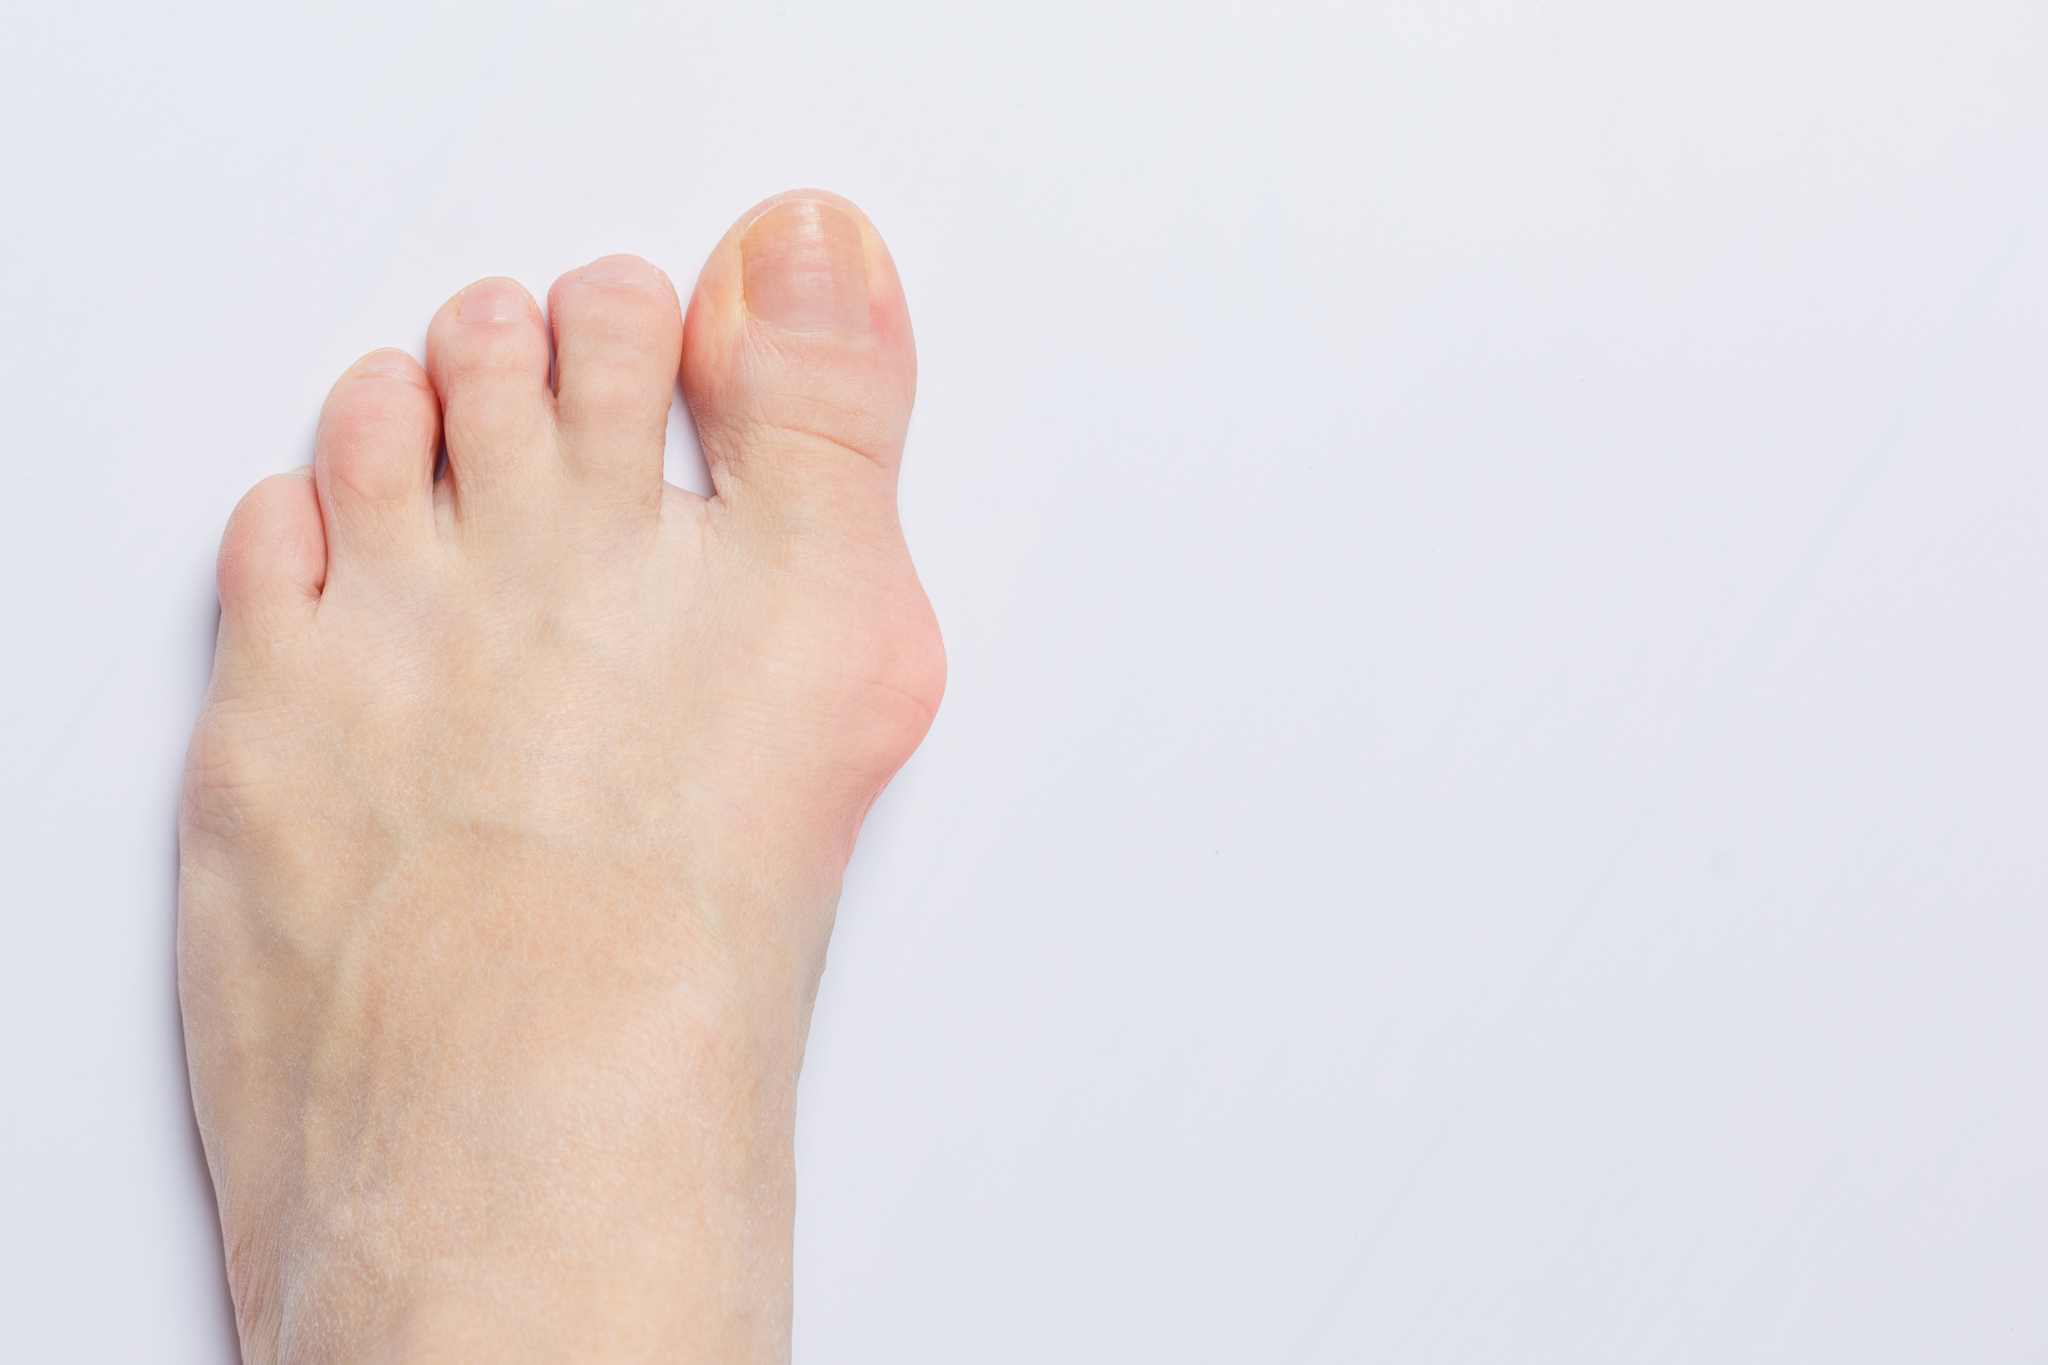 Foot with bunion on white background